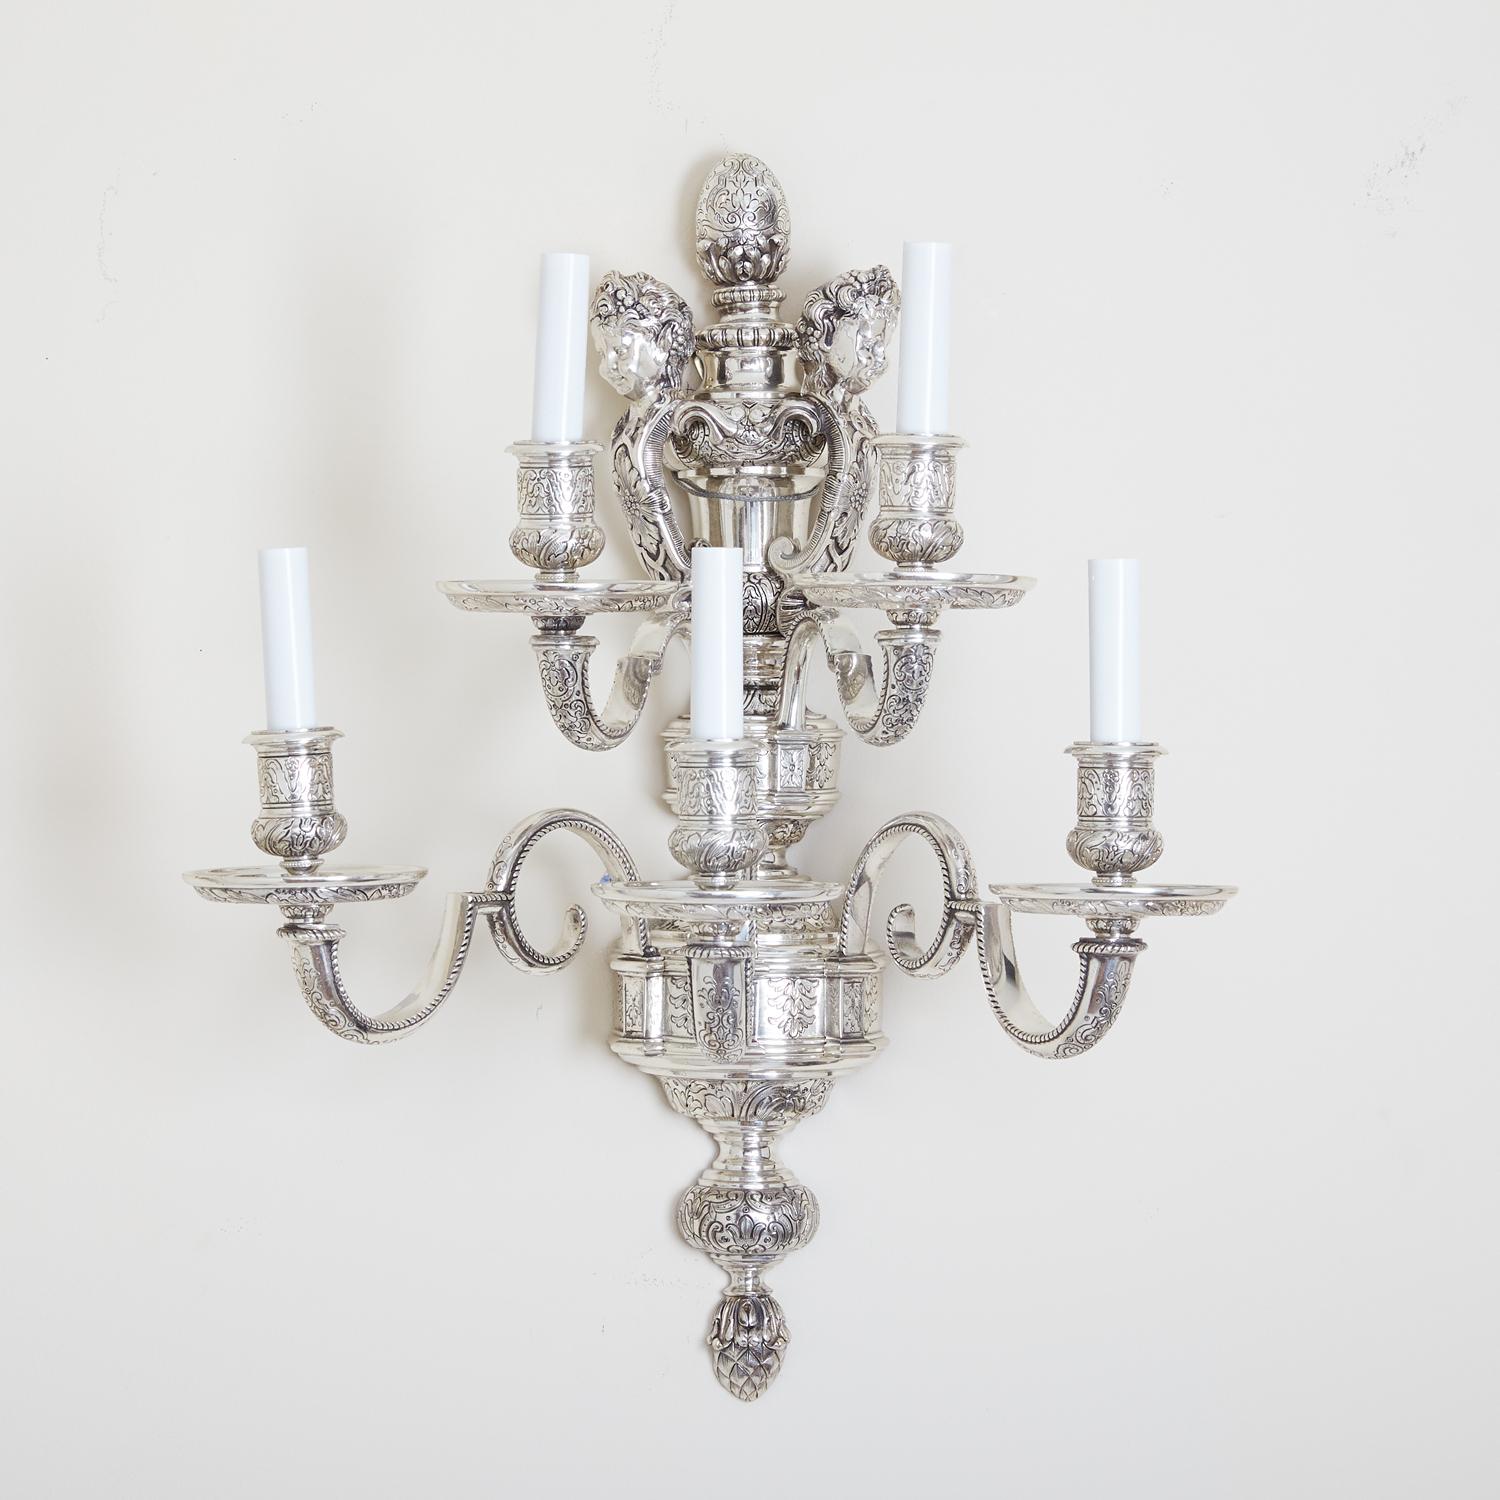 A pair of exquisite, documented Caldwell wall sconces. Each featuring five lights, these sconces are beautifully crafted, with silver nickel plated frames featuring vase shaped backplates. These light fixtures also feature two tiers of candle arms,